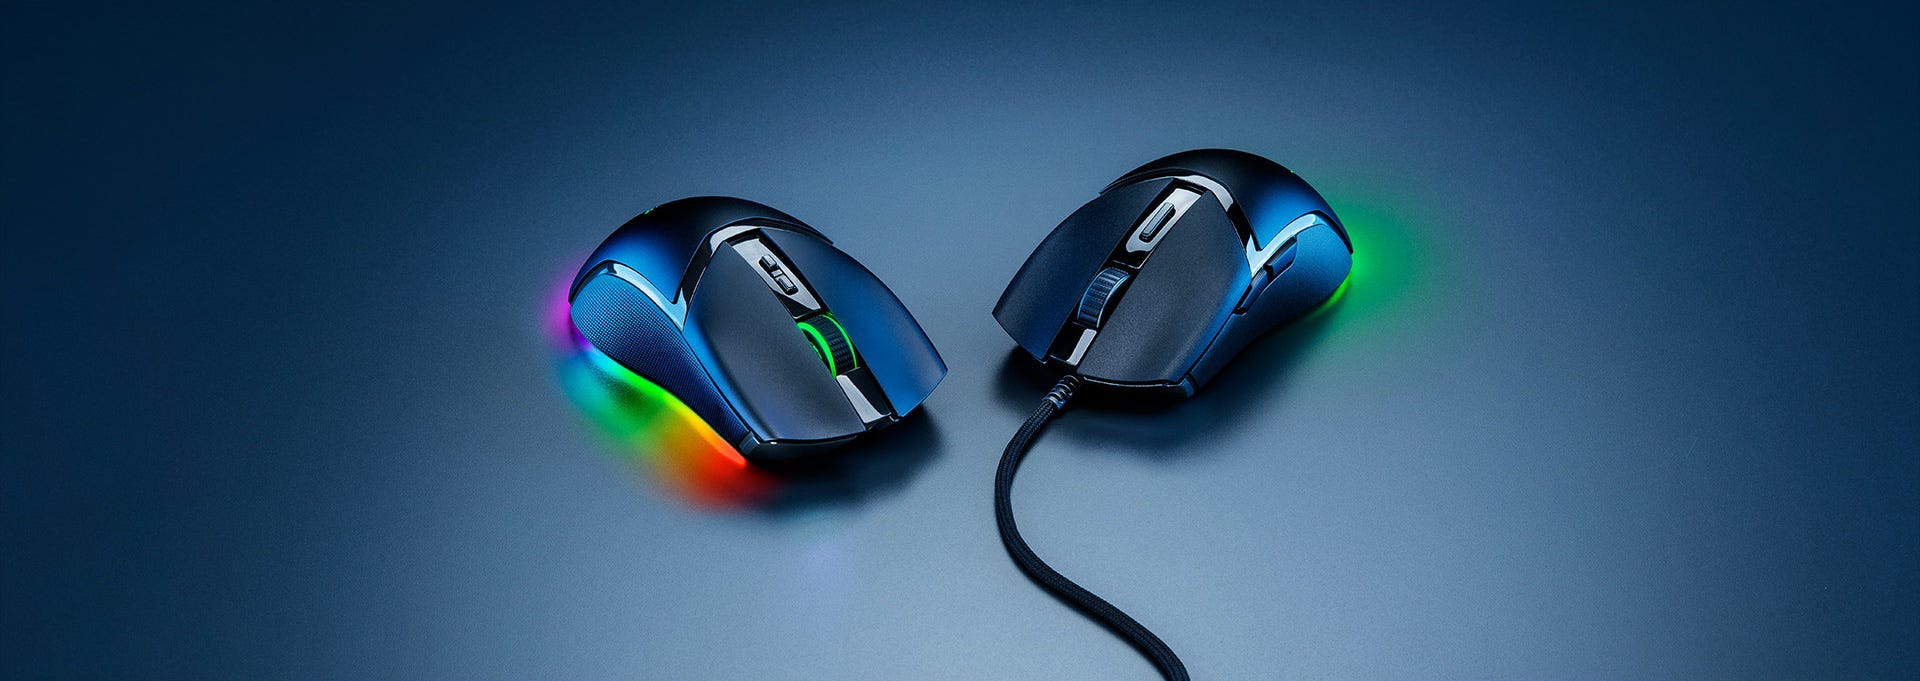 Razer's New Cobra Gaming Mouse is a Bad Swerve | by Alex Rowe | Medium